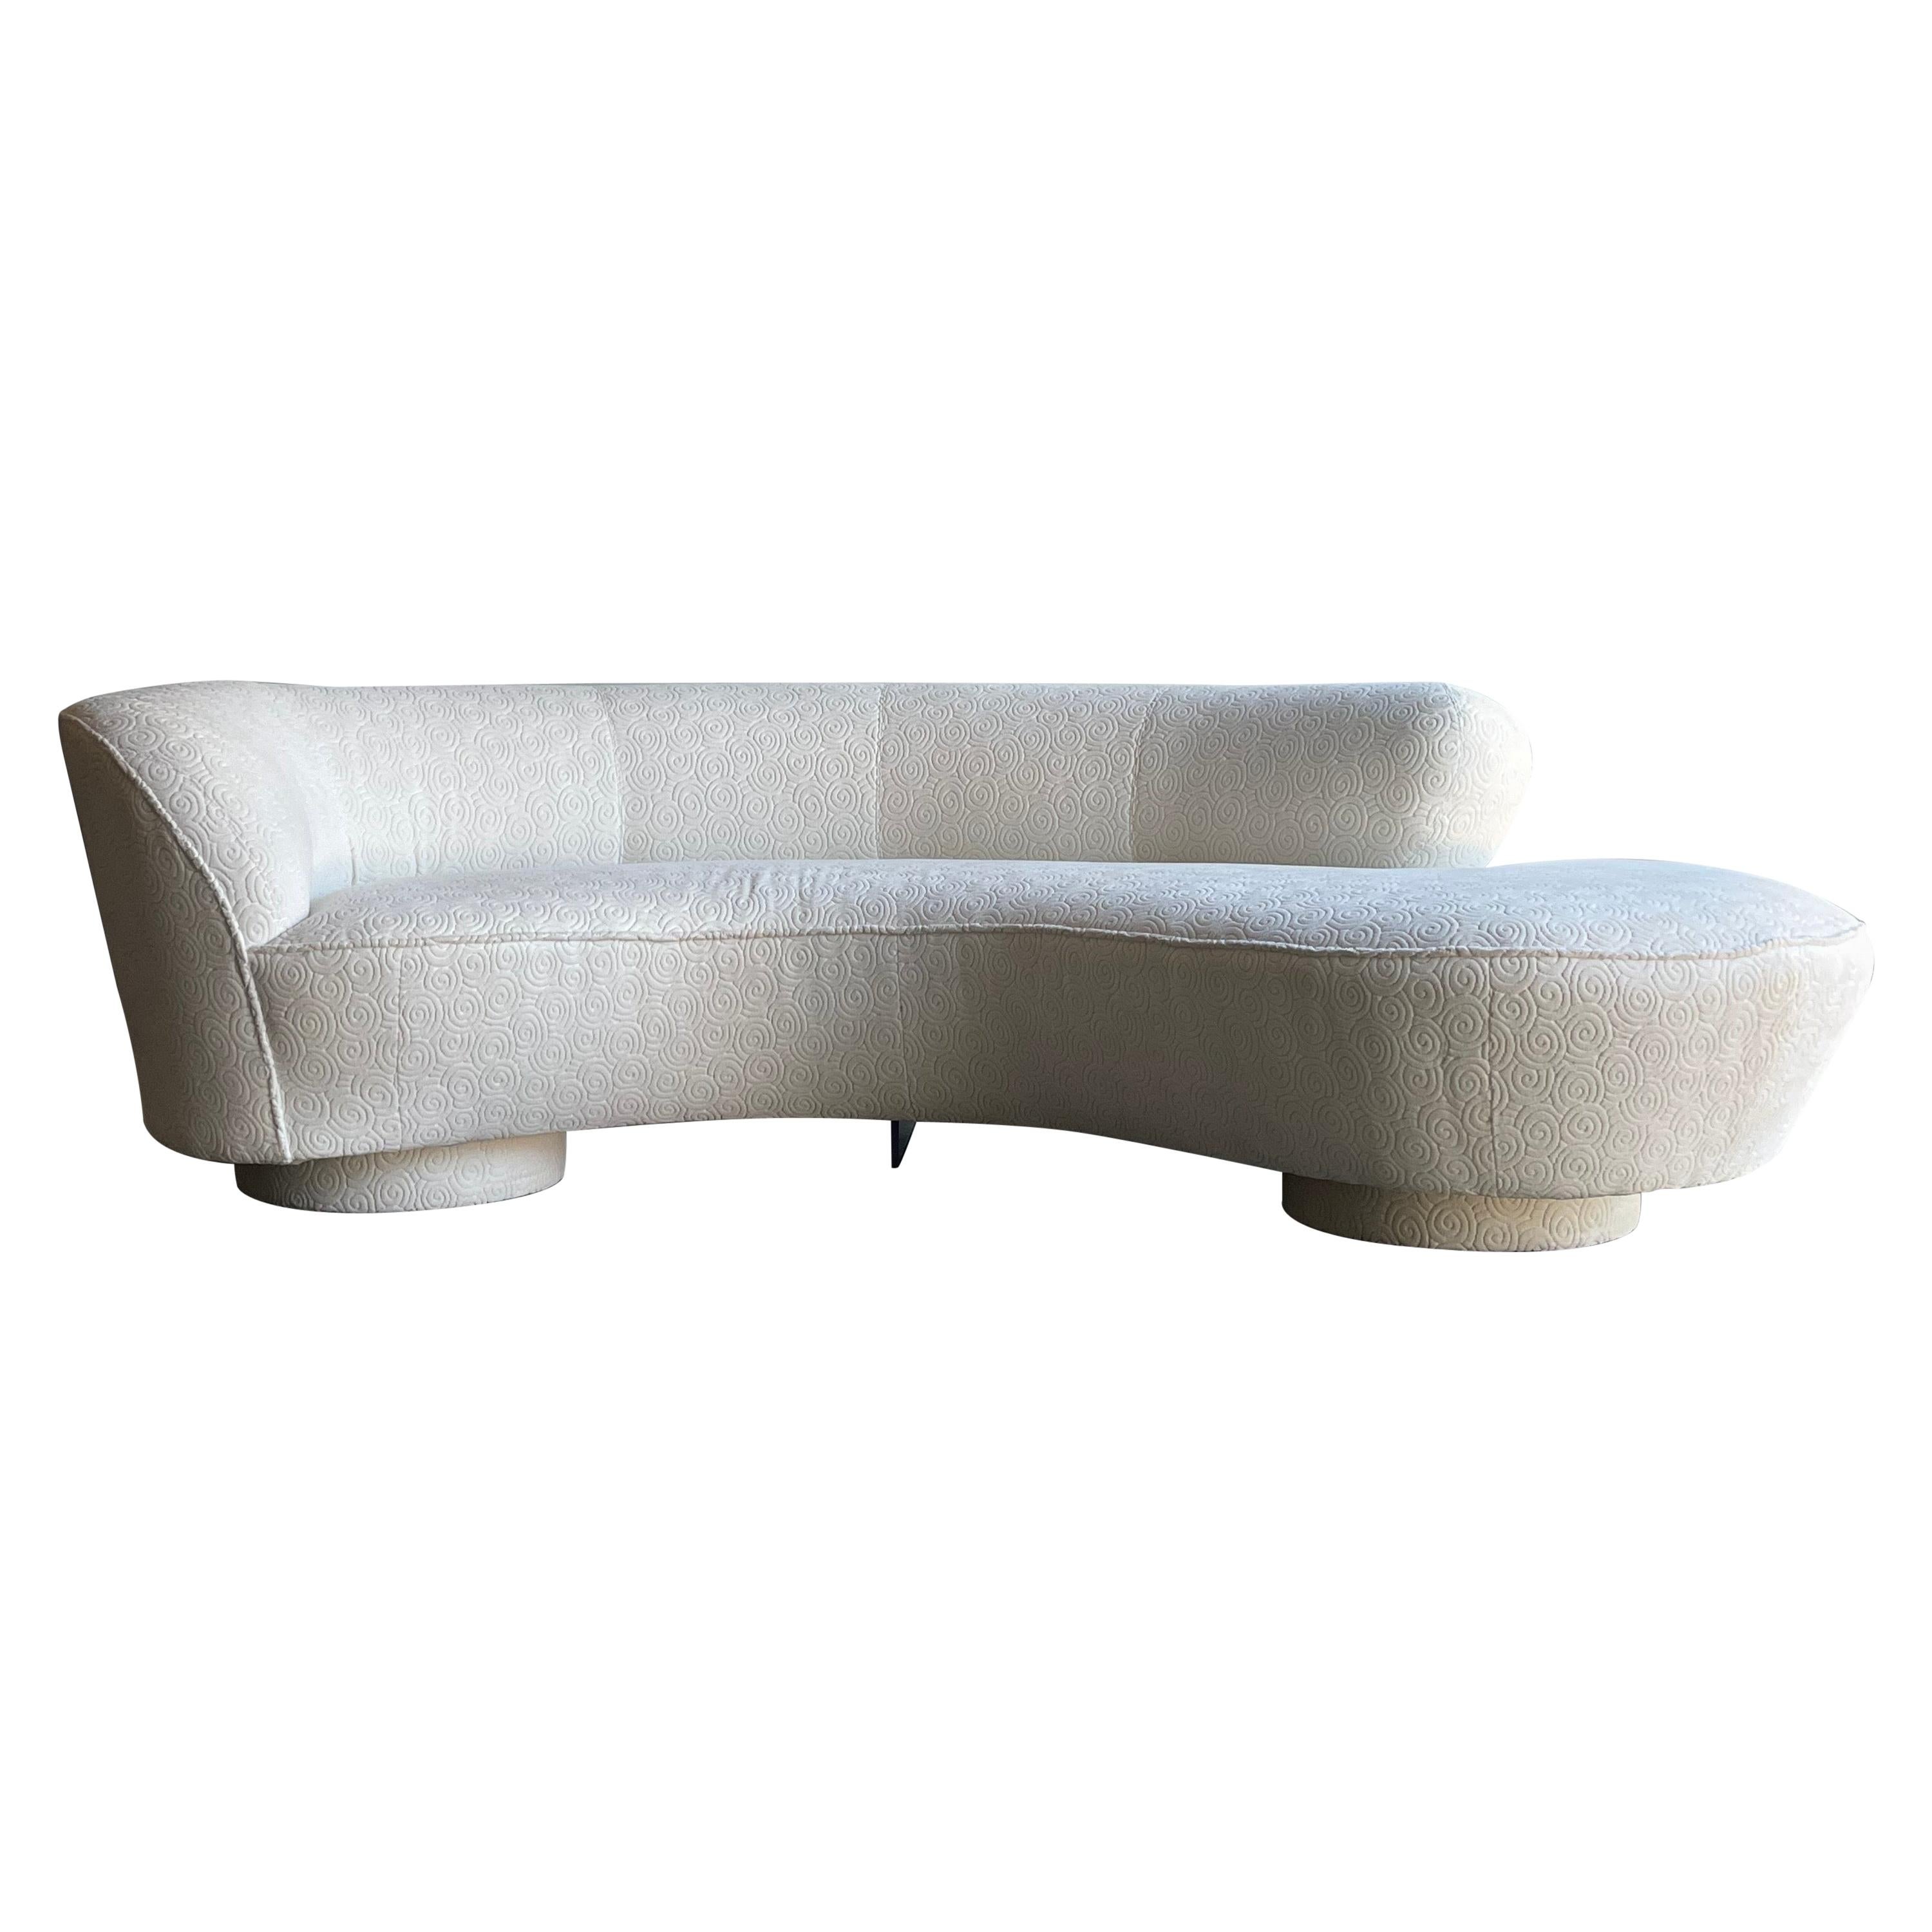 Vladimir Kagan Cloud Sofa for Directional with Lucite Support